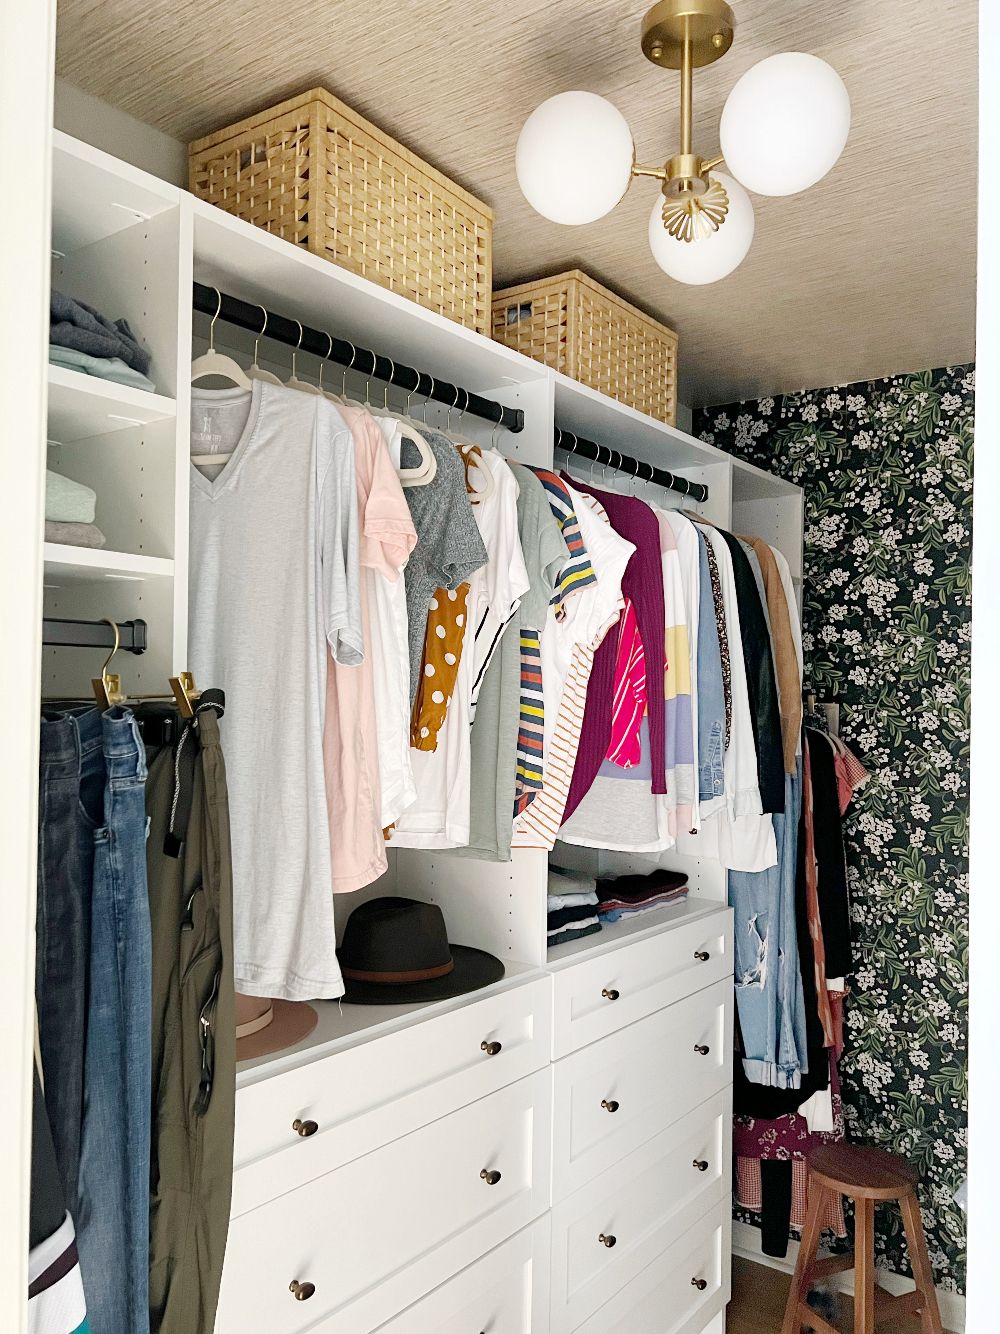 closet makeover after picturing closet built-ins with hanging space and drawers, floral wallpaper on back wall and grasscloth wallpaper on ceiling, baskets on shelves and a semi-flush light fixture